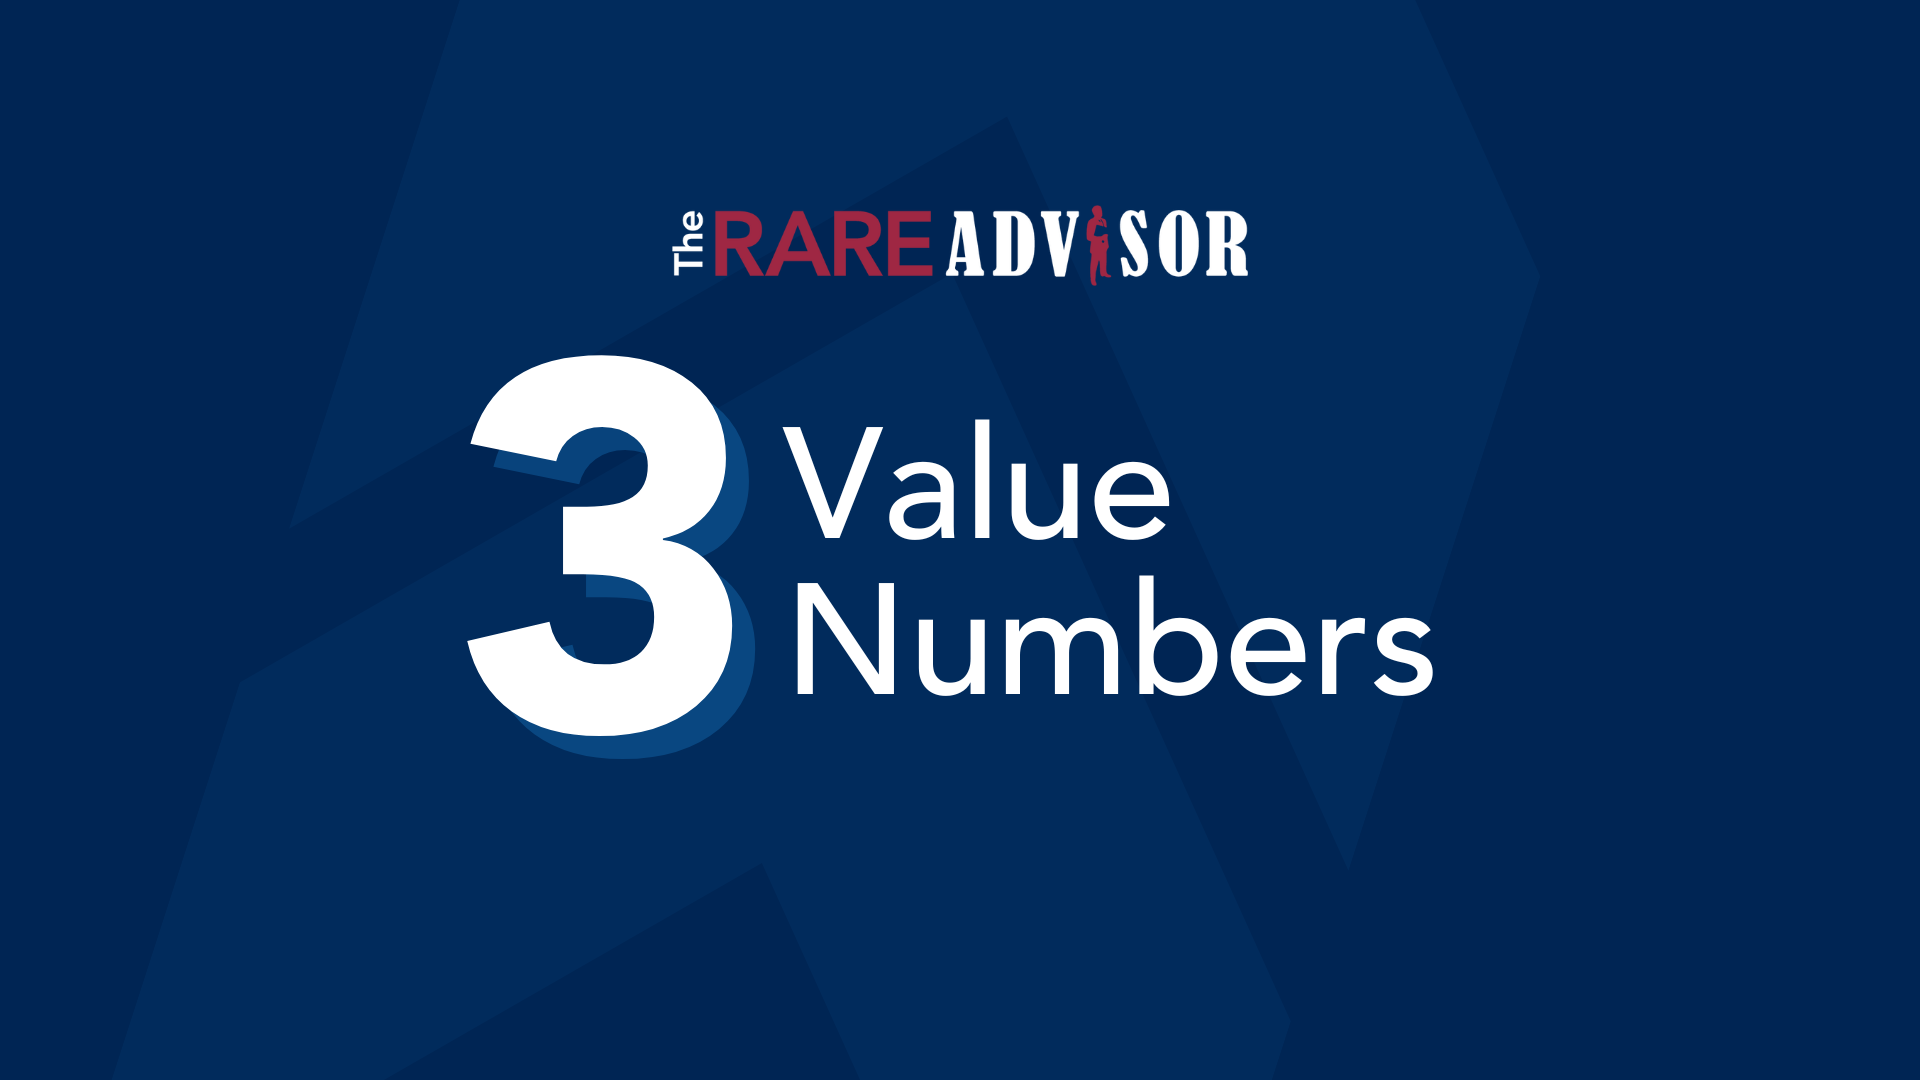 The RARE Advisor: The 3 Value Numbers You Need to Know